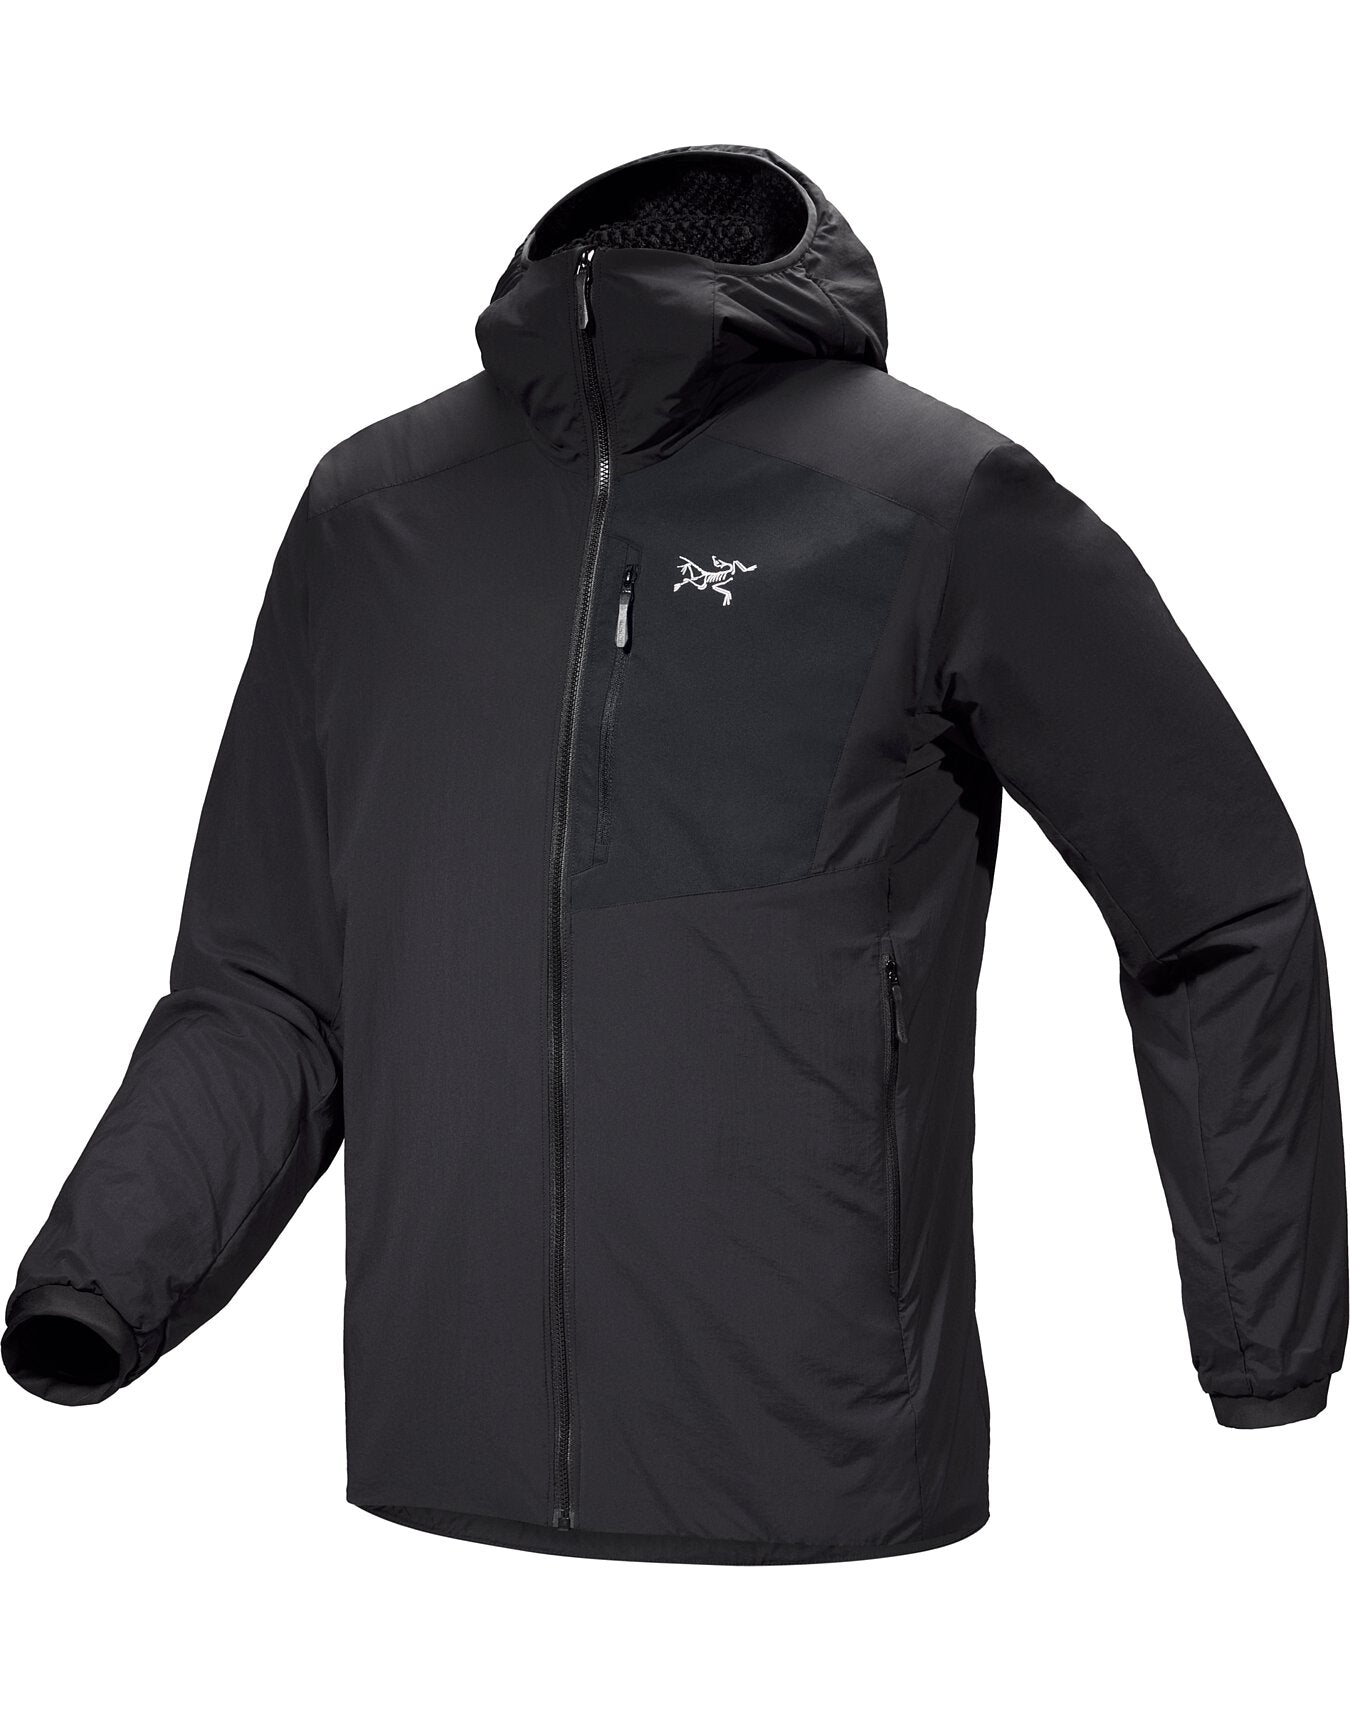 Men's Technical Insulated Jackets | Monod Sports